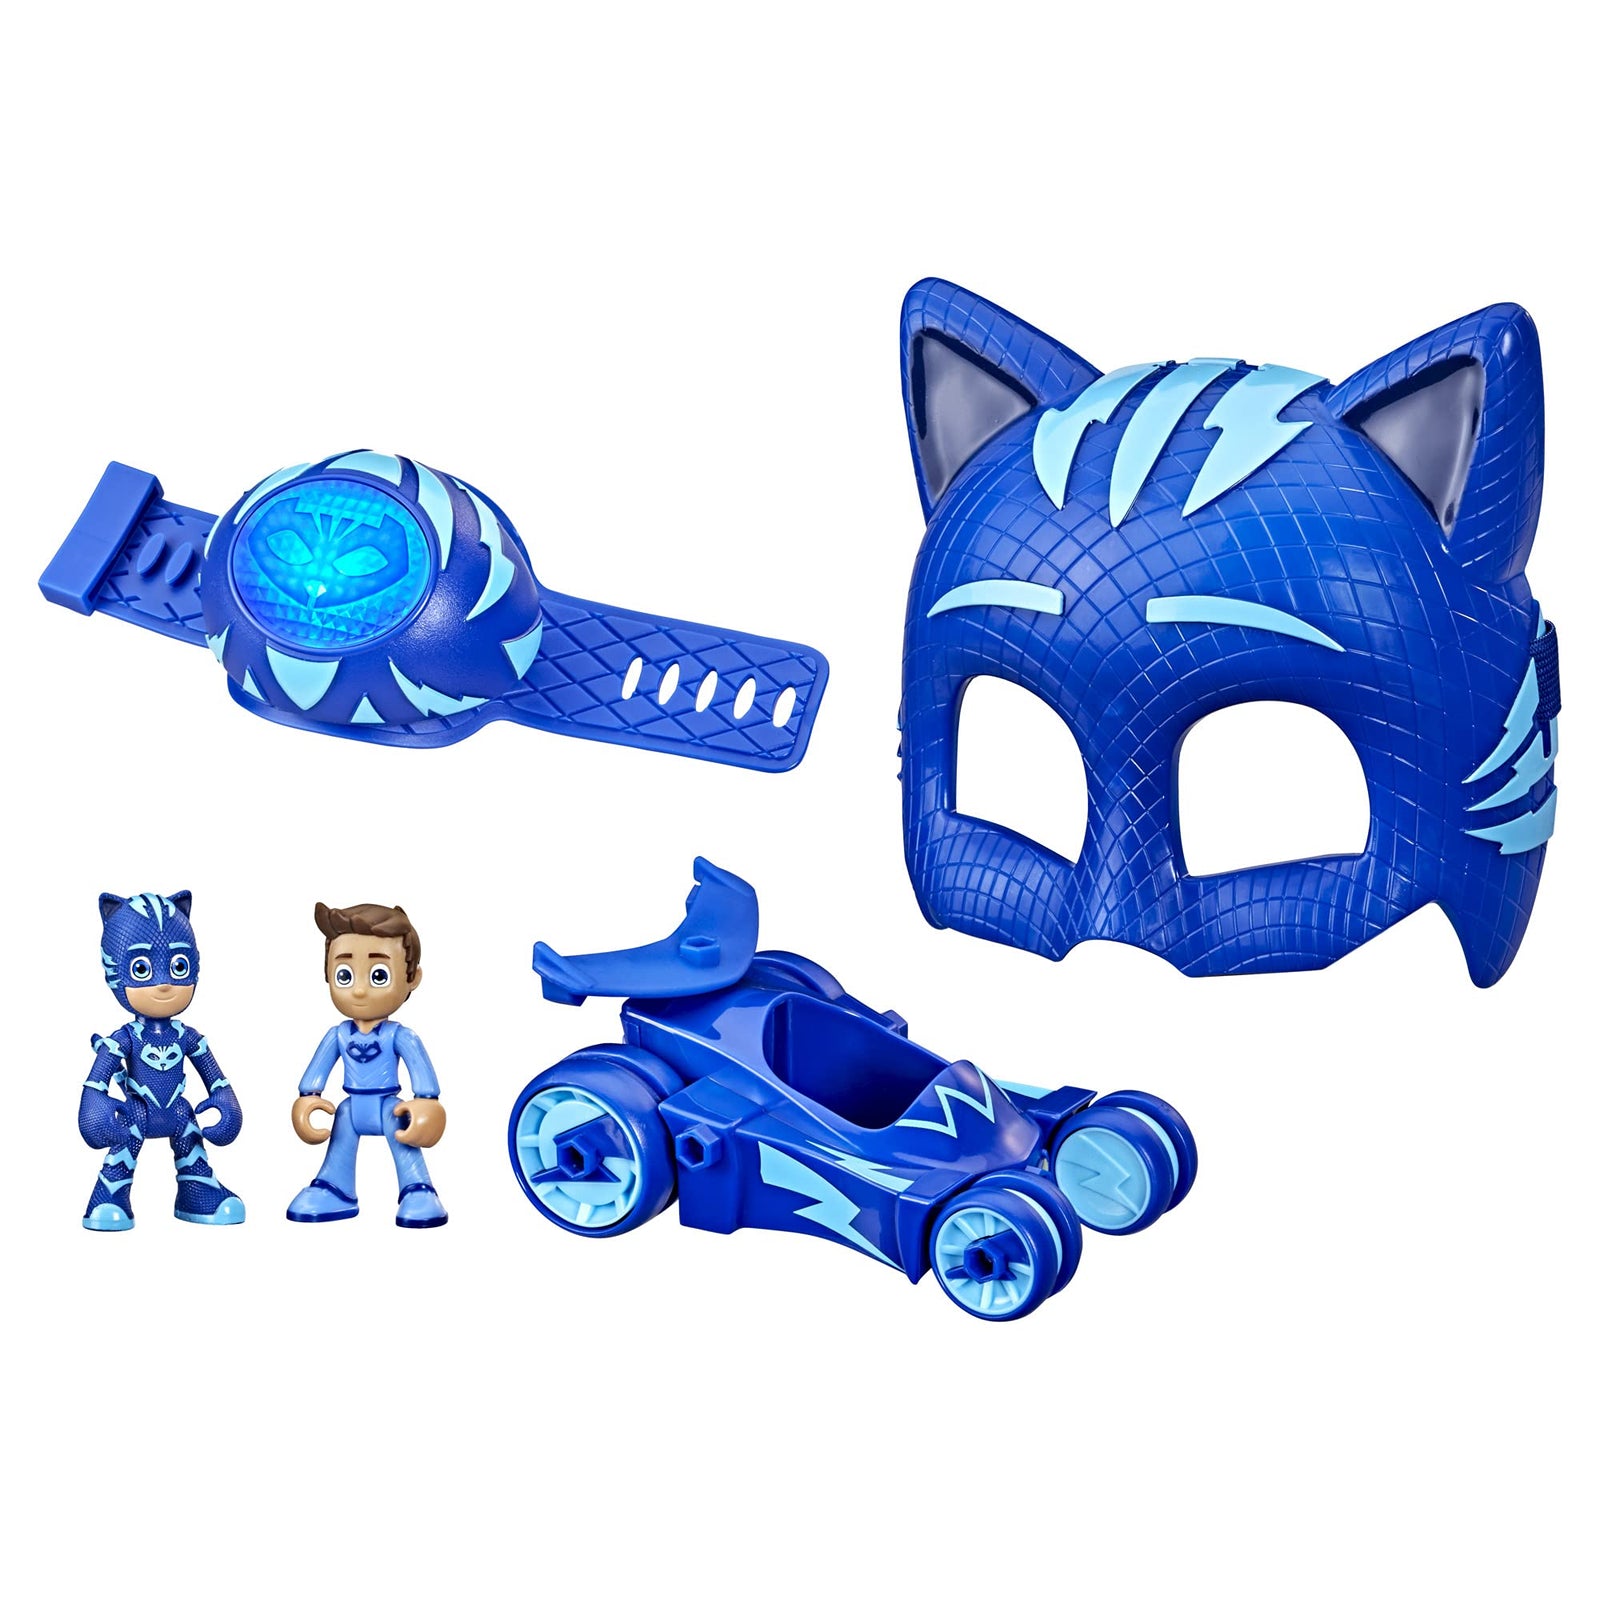 PJ-Masks Catboy Power Pack Preschool Toy Set with 2 PJ-Masks-Action-Figures, Vehicle, Wristband, and-Costume-Mask for Kids Ages 3 and Up